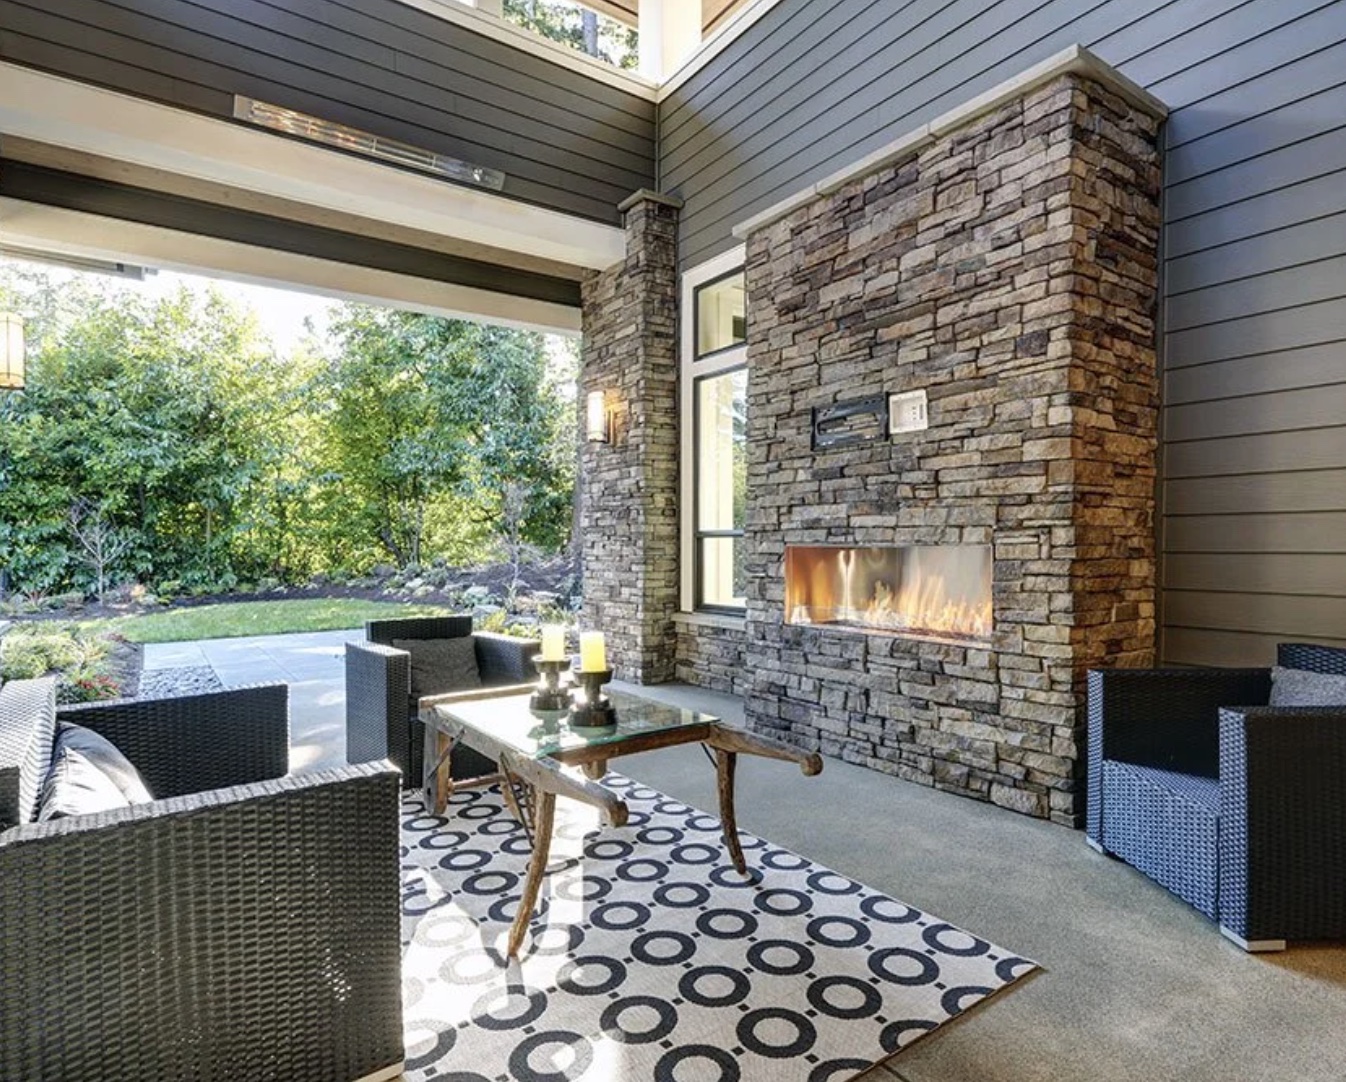 Outdoor fireplace and patio with modern design - Newton MA Home Remodeling Exponential Construction Corp.